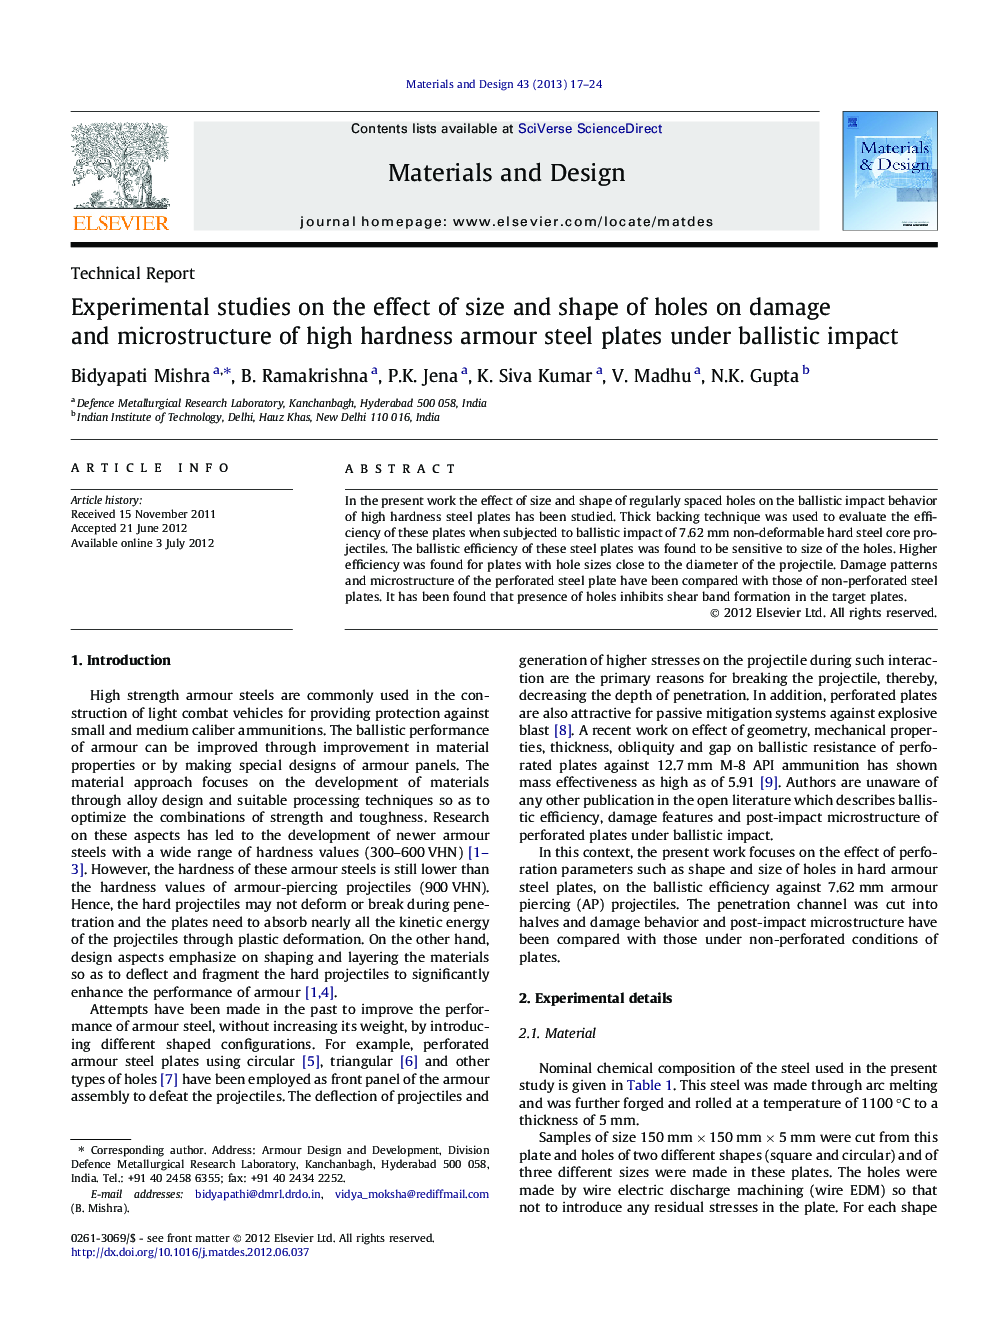 Experimental studies on the effect of size and shape of holes on damage and microstructure of high hardness armour steel plates under ballistic impact